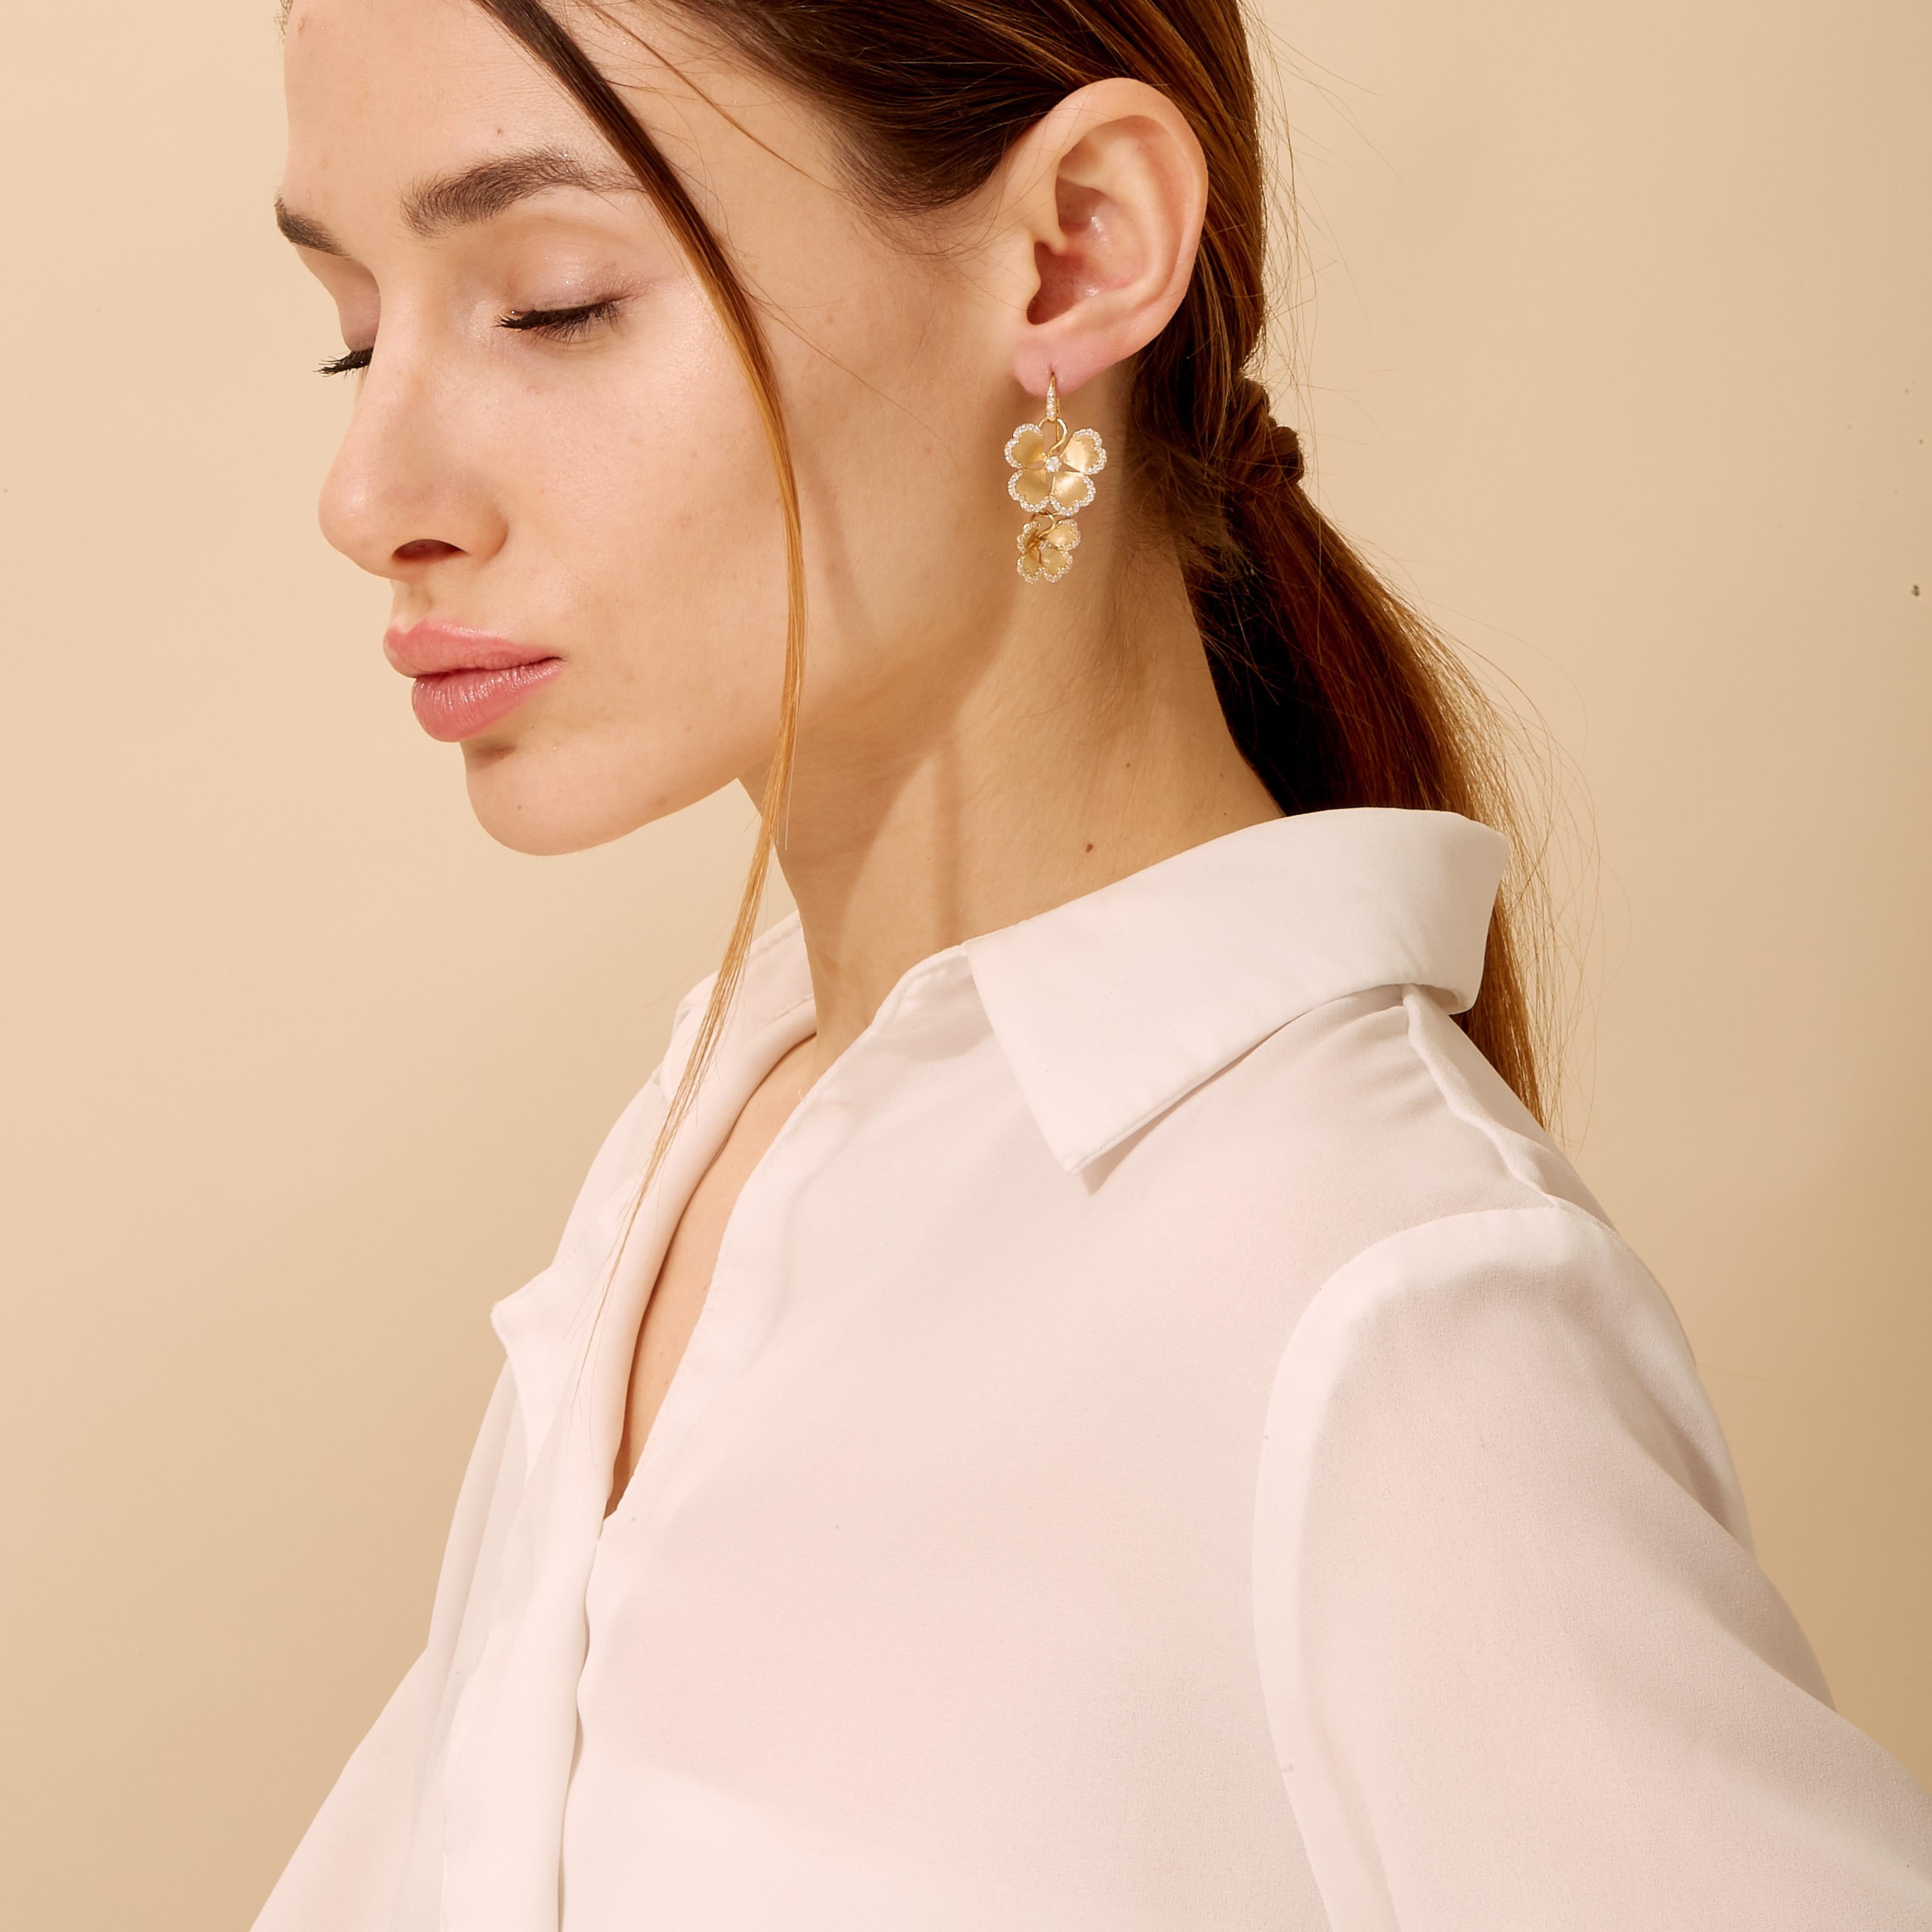 Created in 18 karat yellow gold
Diamonds 1.10 carats approx.
French wire for pierced ears
Limited edition

Exquisitely worked in 18 karat yellow gold, these earrings feature a limited edition design encrusted with an approximate aggregate of 1.10